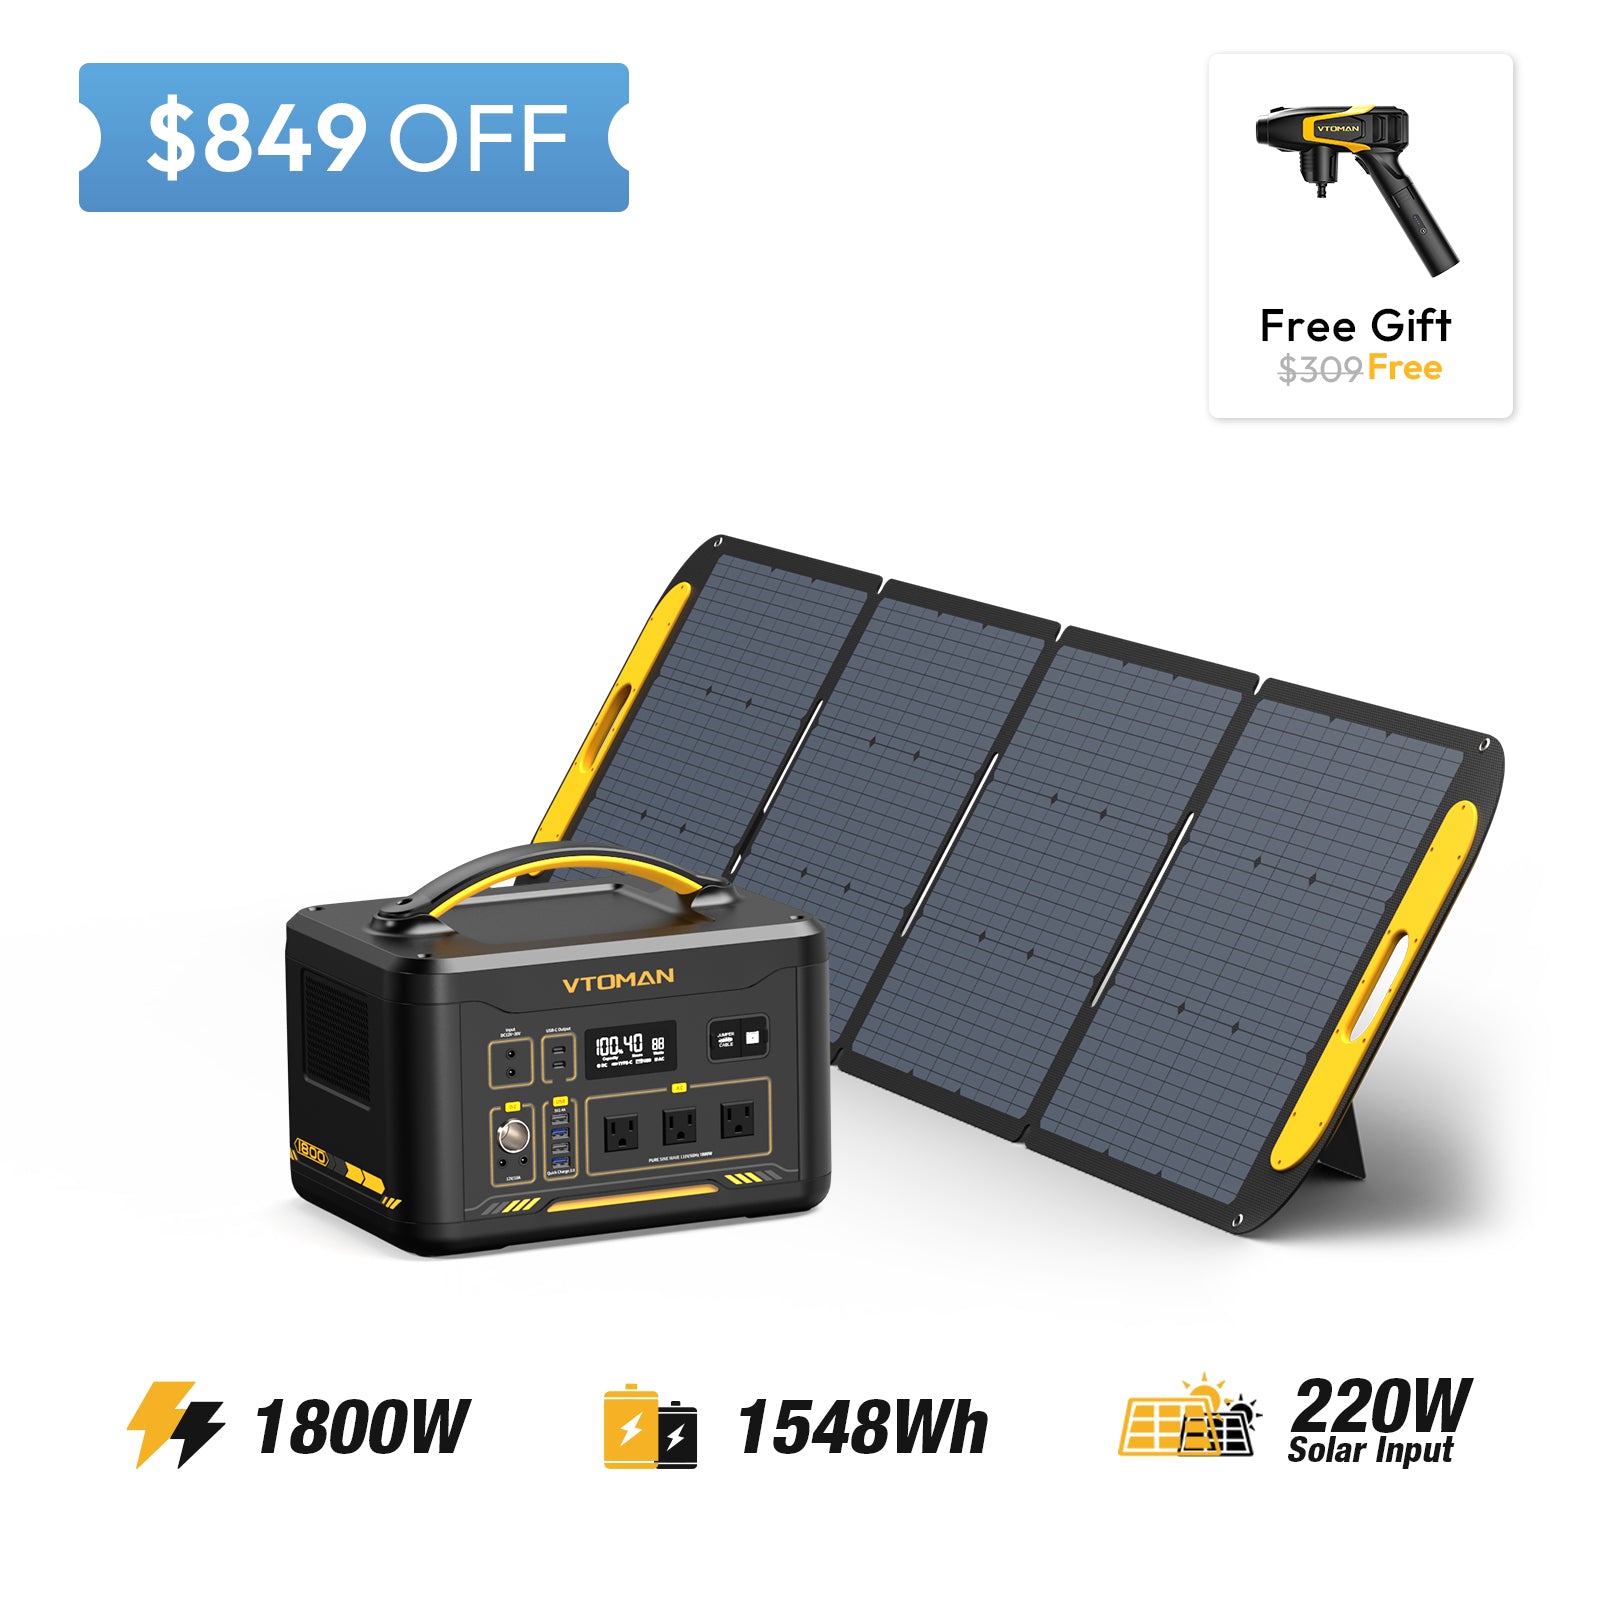 Jump 1500x and VS220 solar panel save $849in summer sale